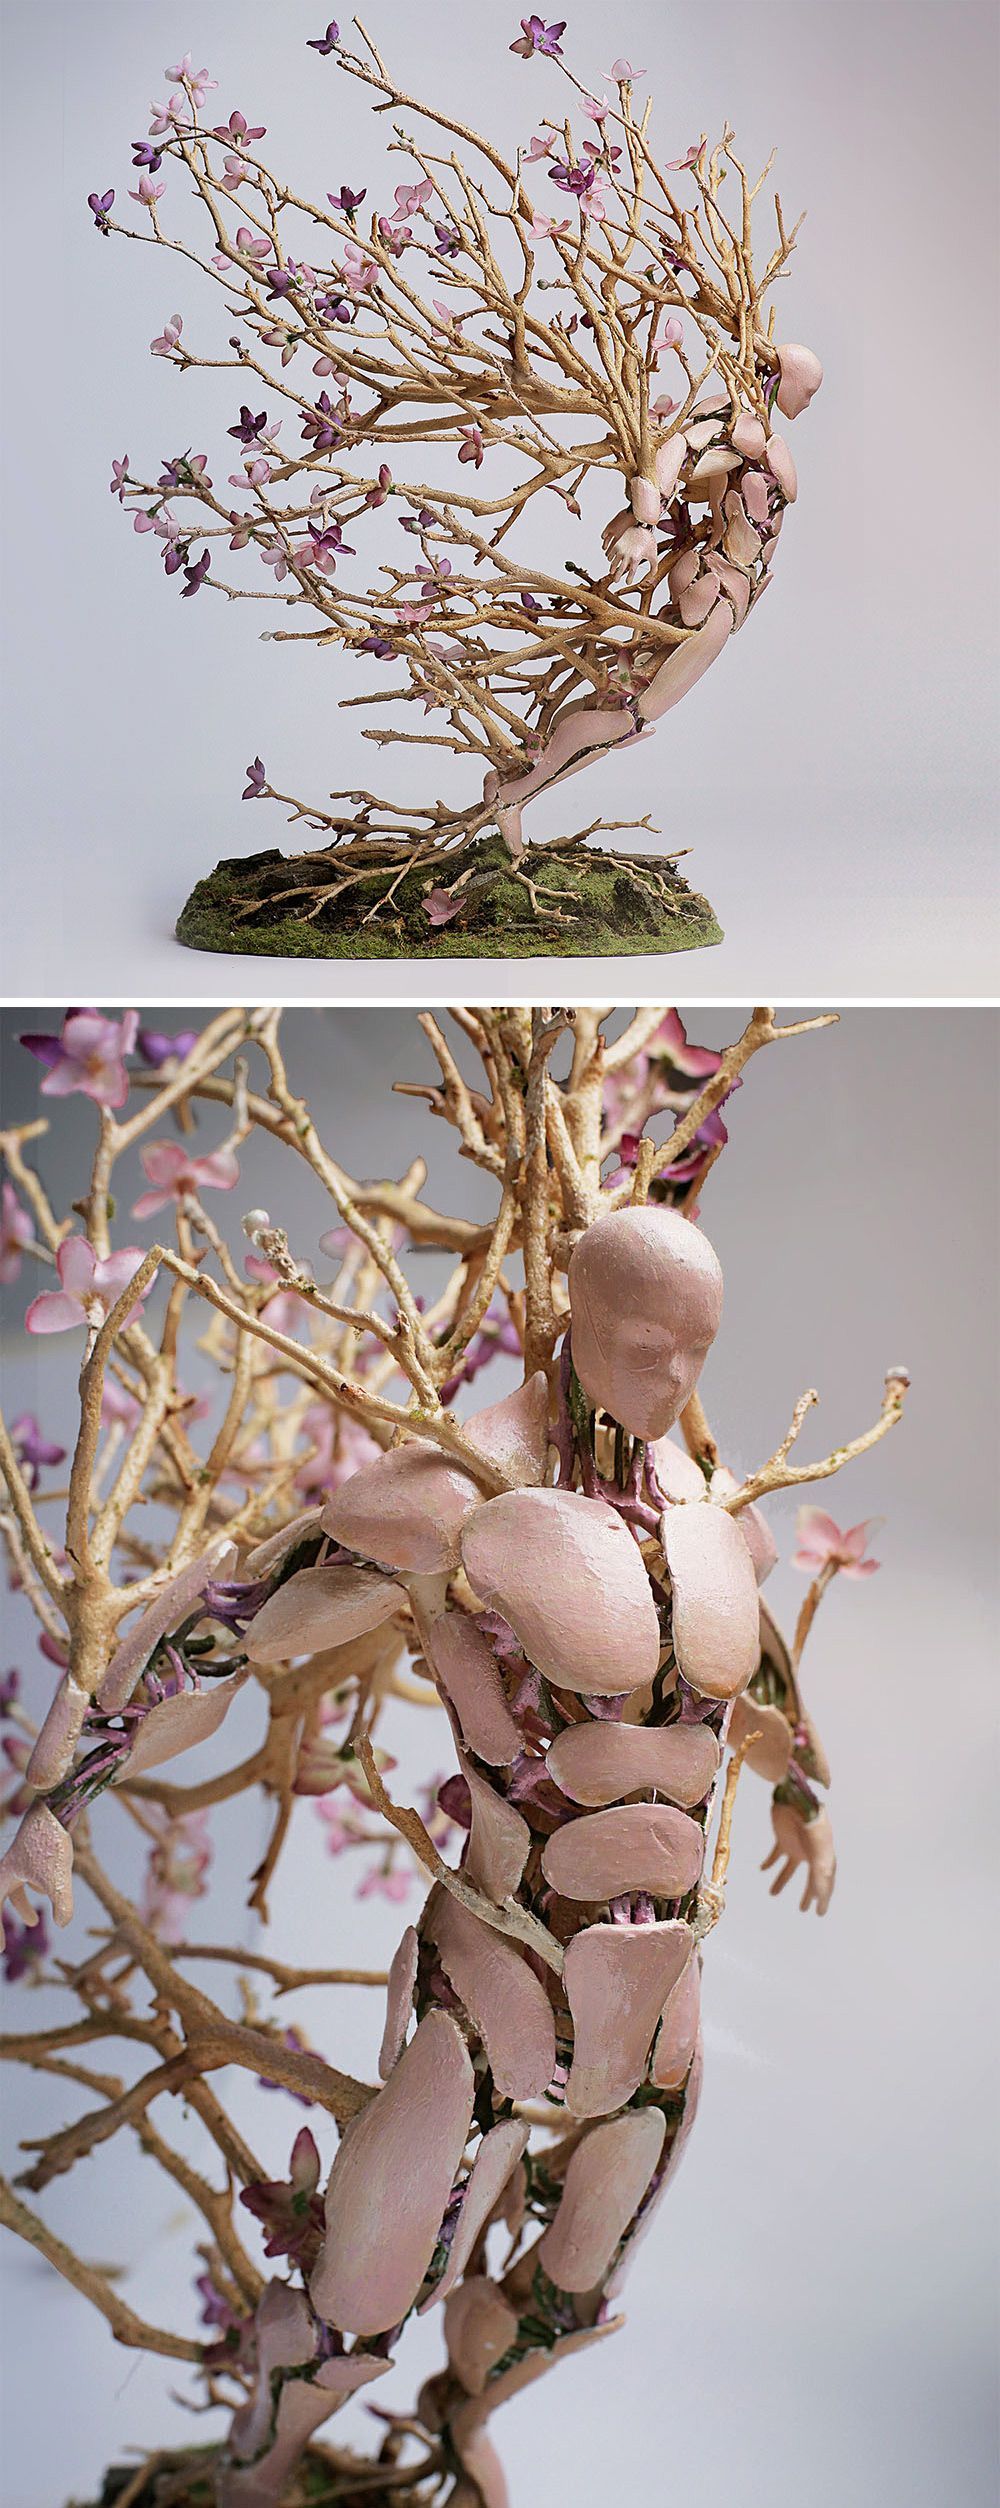 Assembled Figurines by Garret Kane Appear to Burst with the Seasons